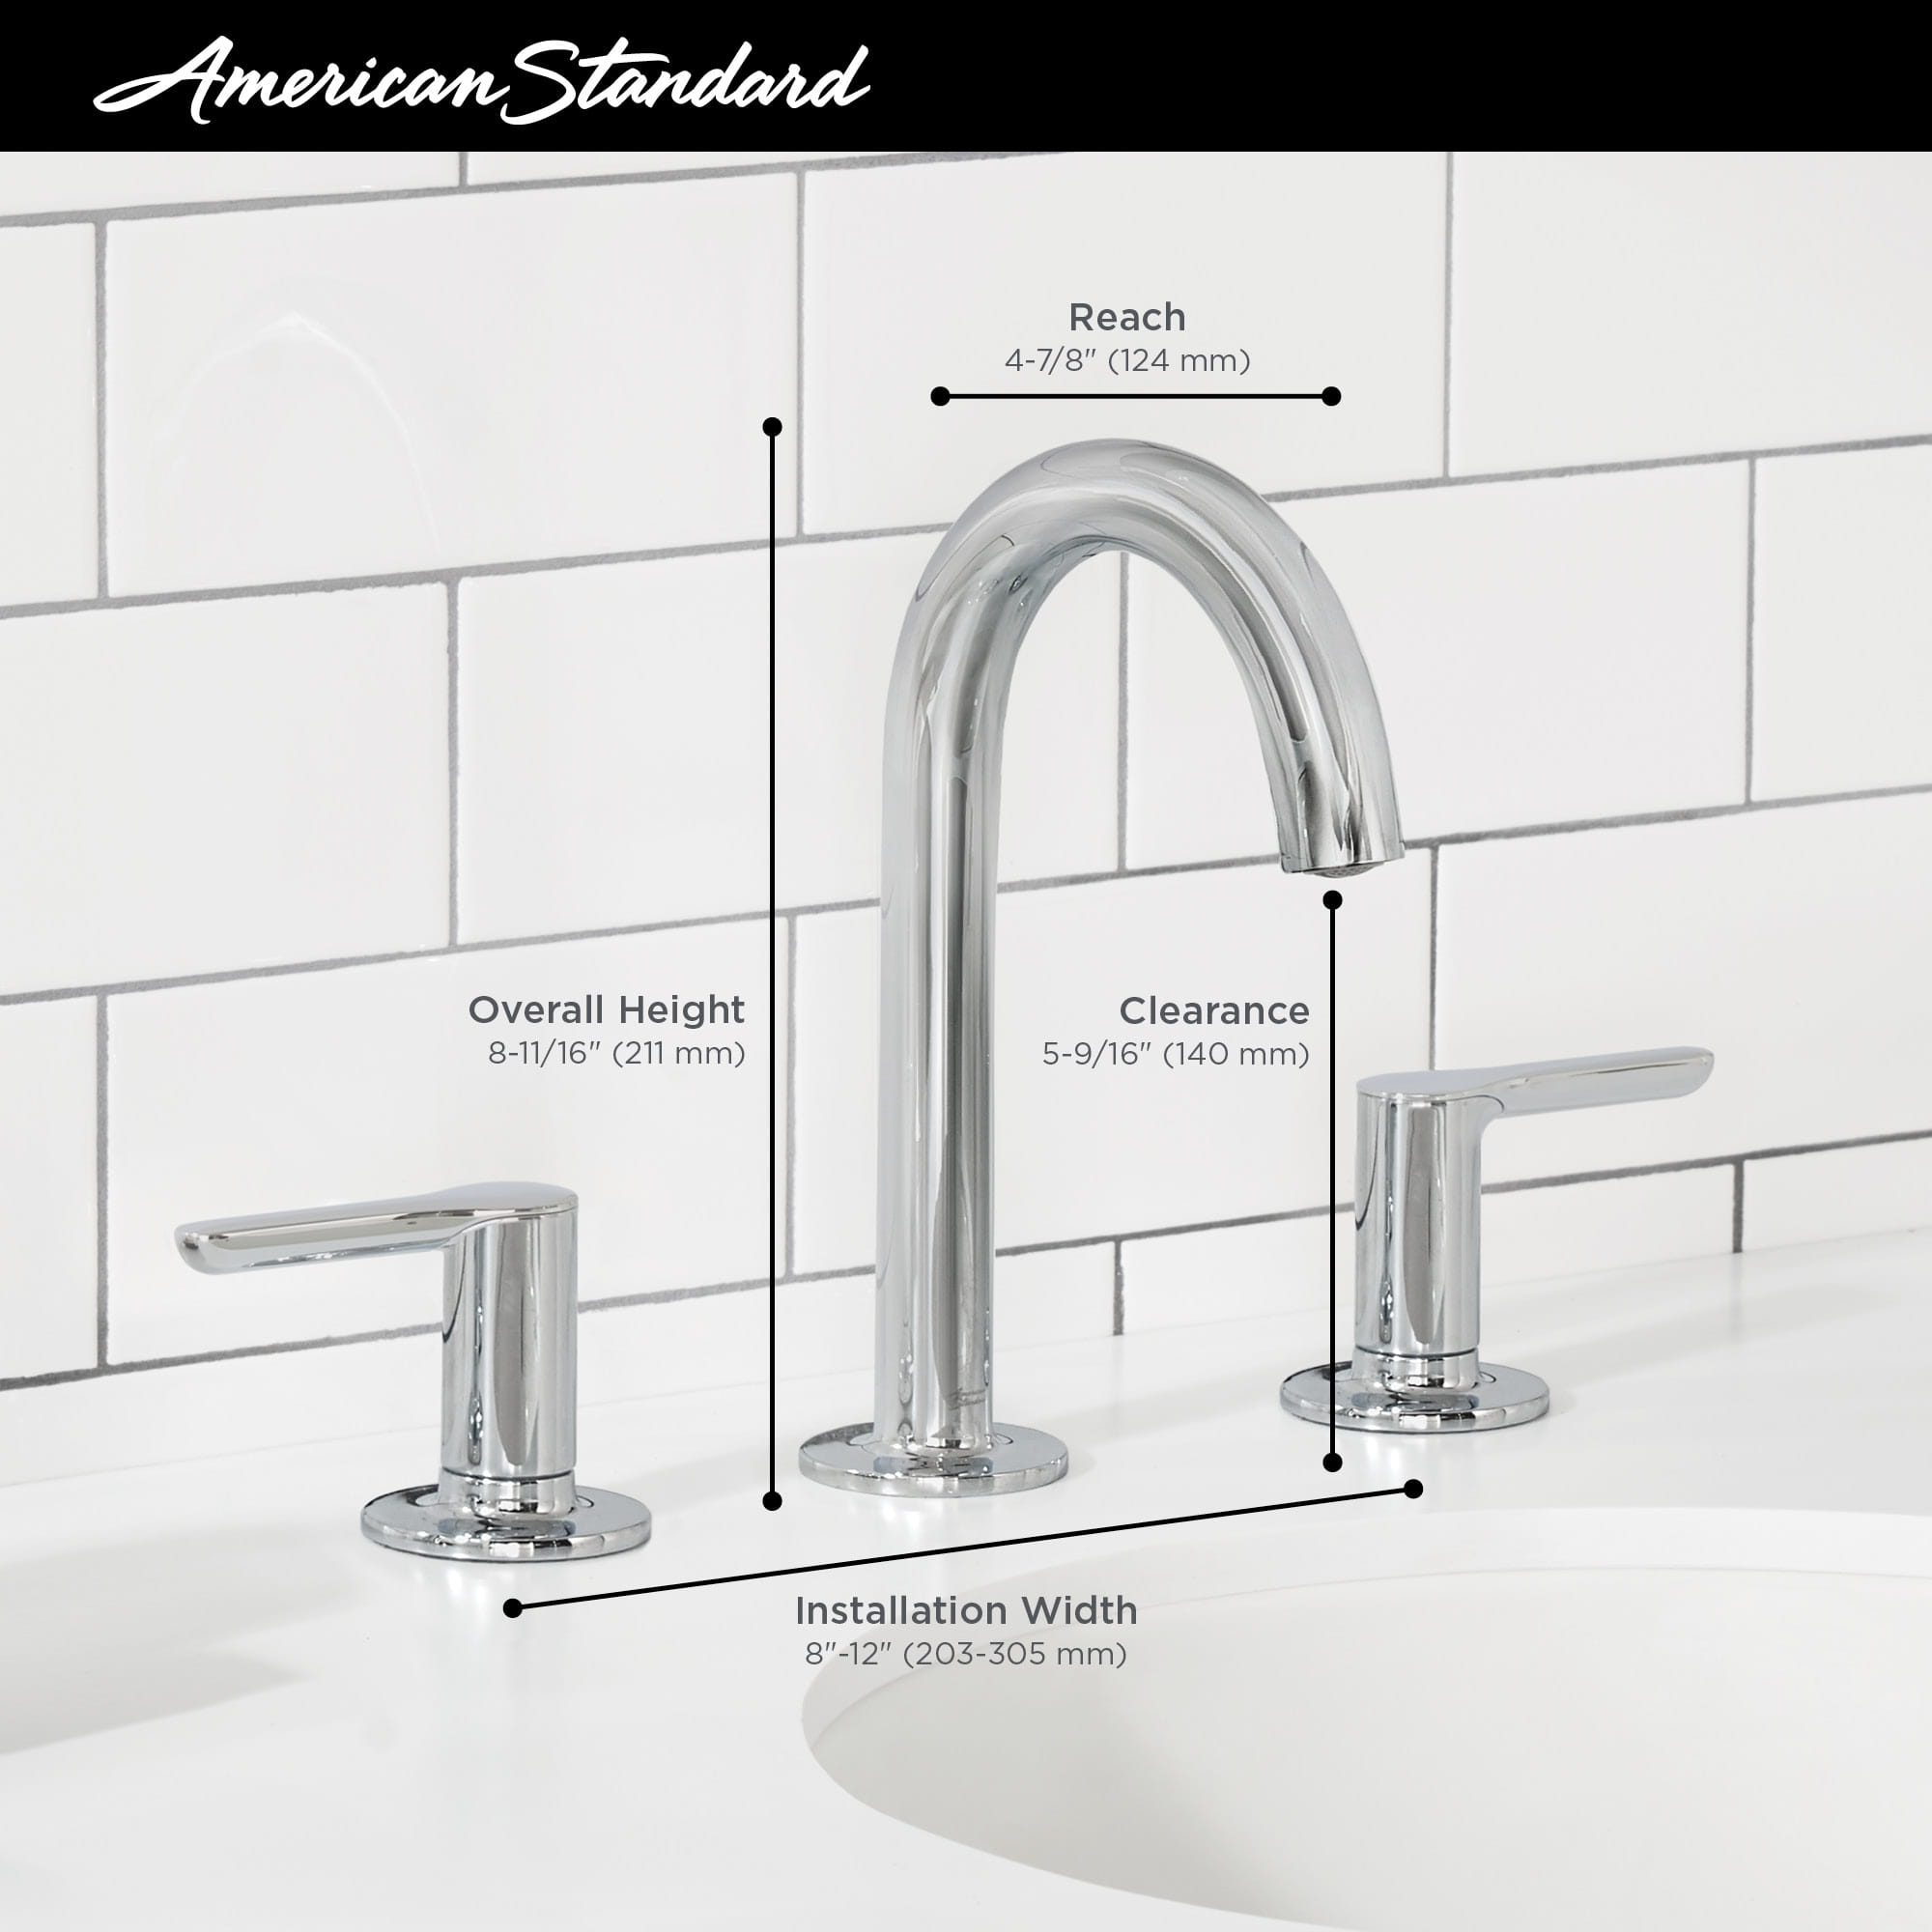 Studio® S 8-Inch Widespread 2-Handle Bathroom Faucet 1.2 gpm/4.5 L/min With